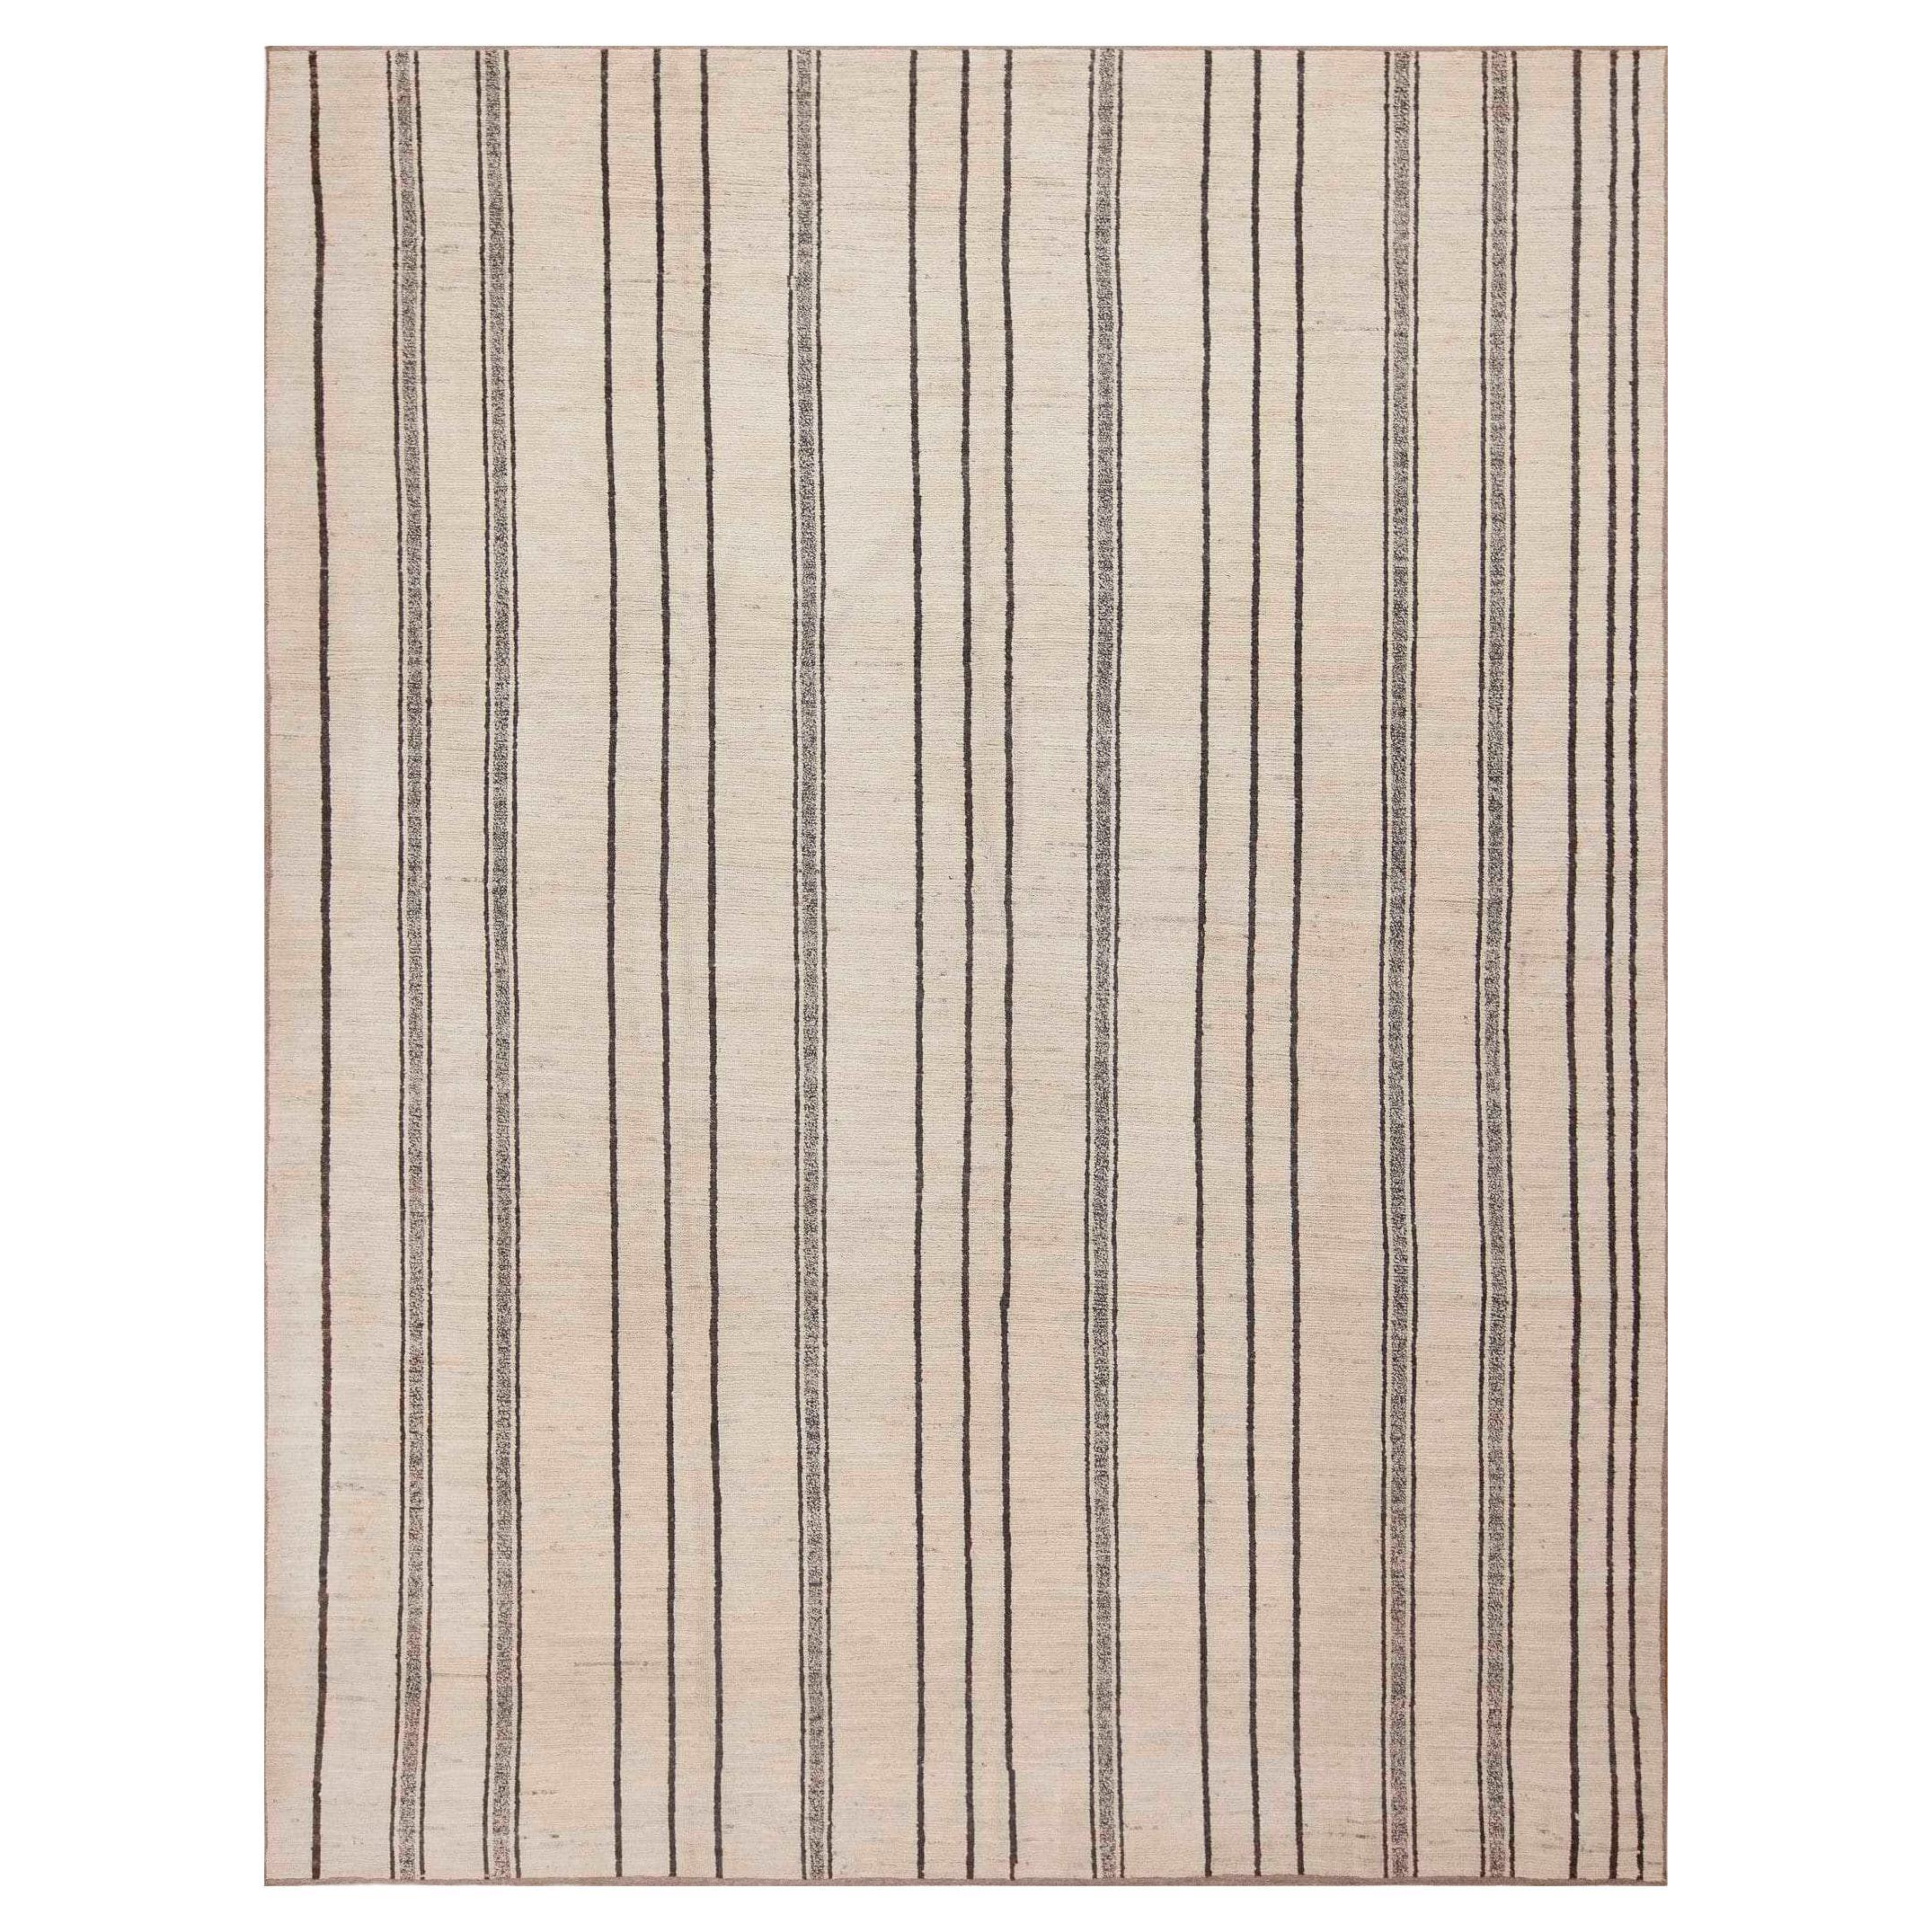  Nazmiyal Collection Cream Background Geometric Modern Area Rug 9'3" x 12' For Sale